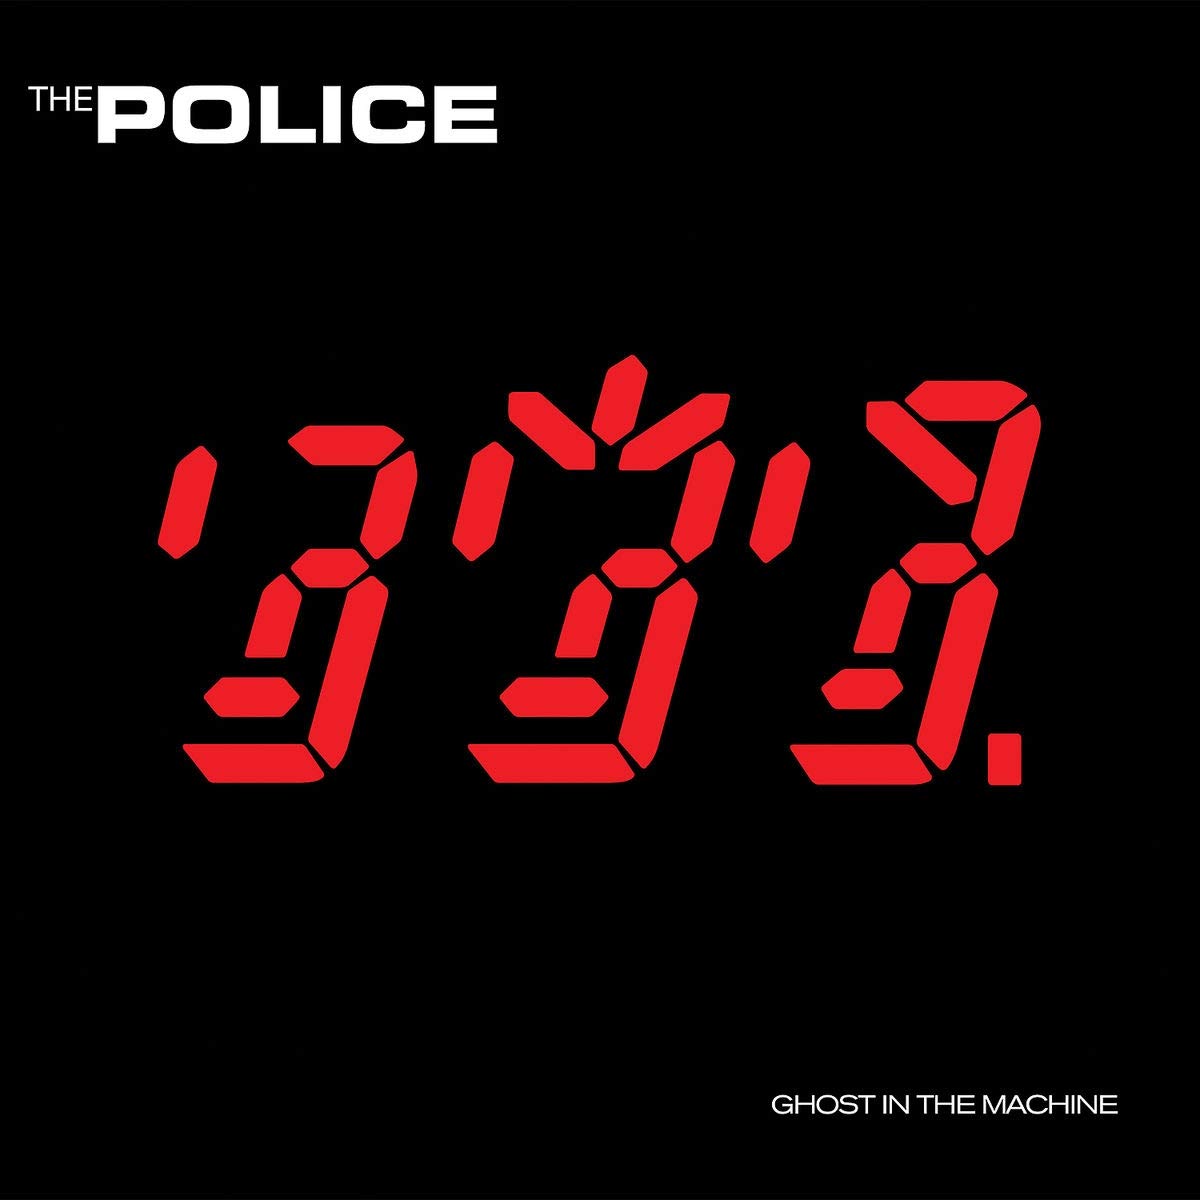 The Police ghost in the machine - Vinyl | The Police